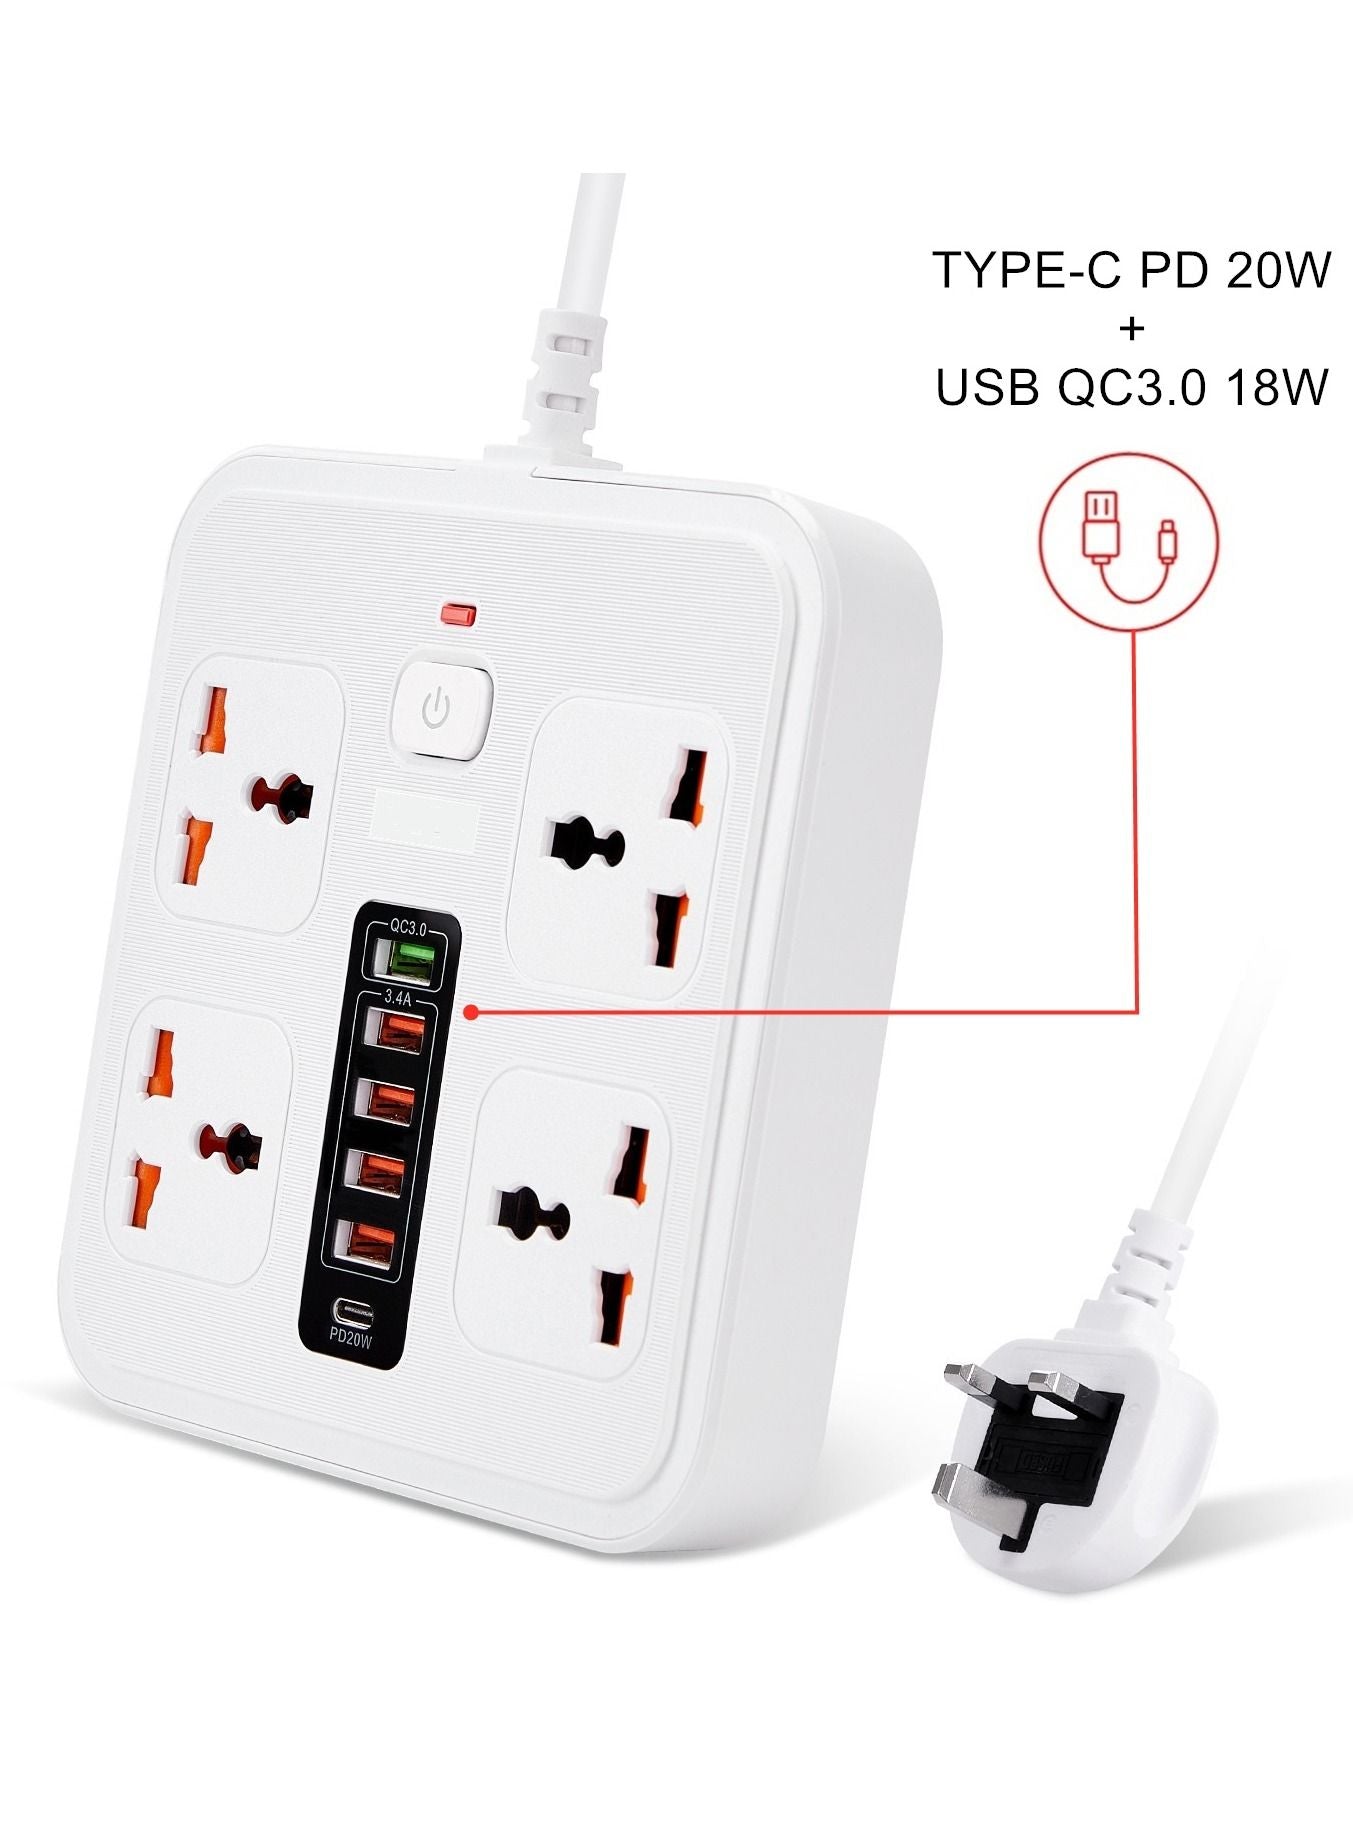 Power Socket with TYPE-C PD 20W + USB QC 3.0 Fast Charging 6 Ports, Universal Power Socket / 4-Way Power Strip / 2m Extension Cable White